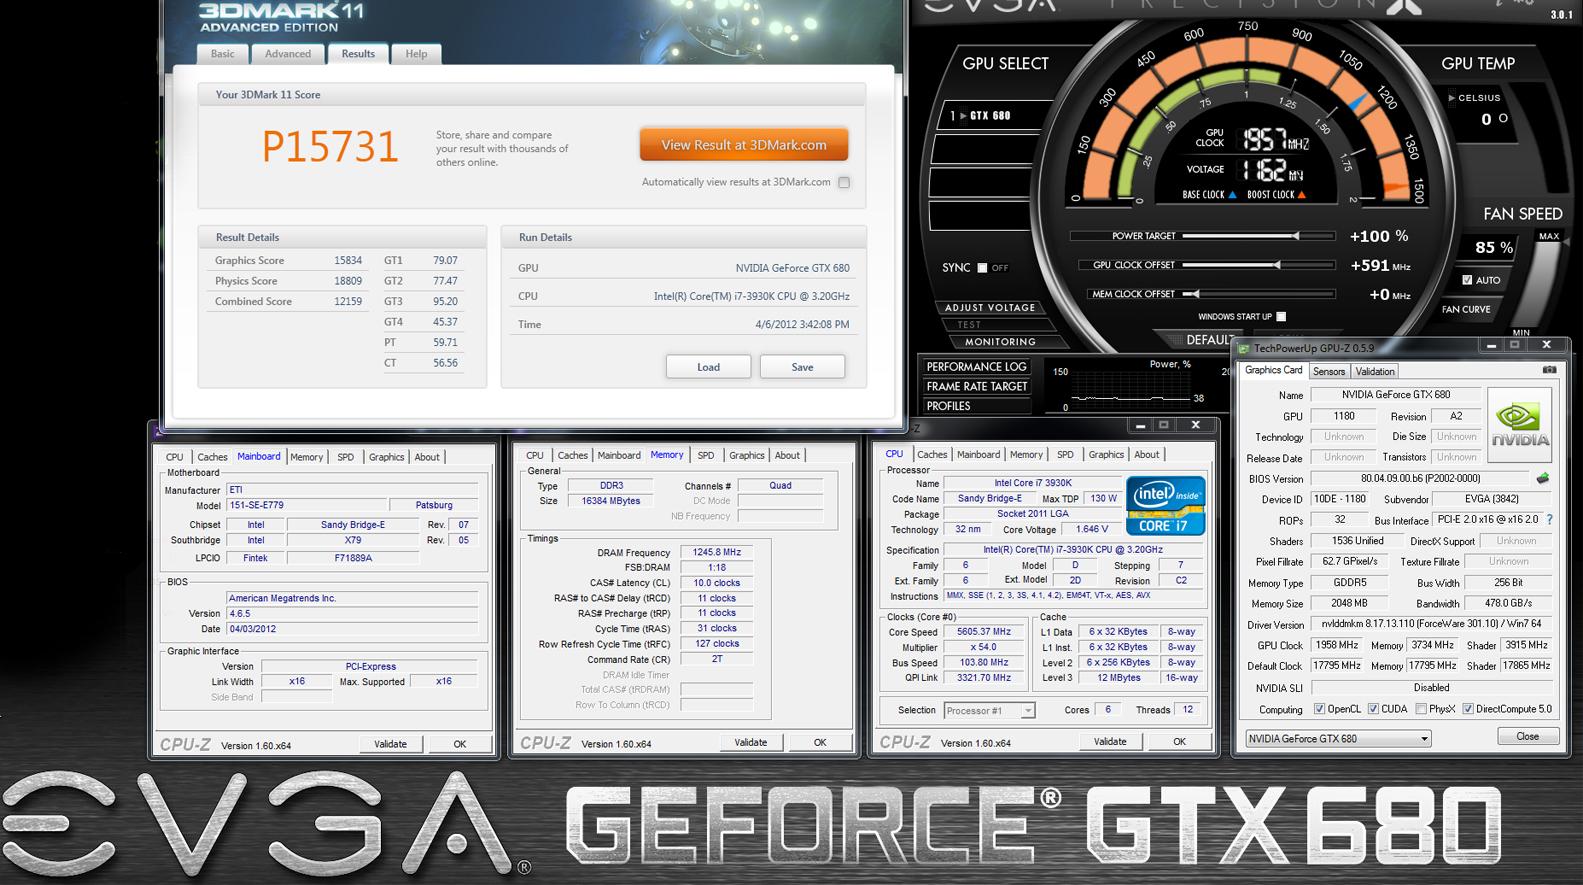 Media asset in full size related to 3dfxzone.it news item entitled as follows: Extreme Overclocking: EVGA GeForce GTX 680 @ 1975Mhz | Image Name: news16981_1.jpg